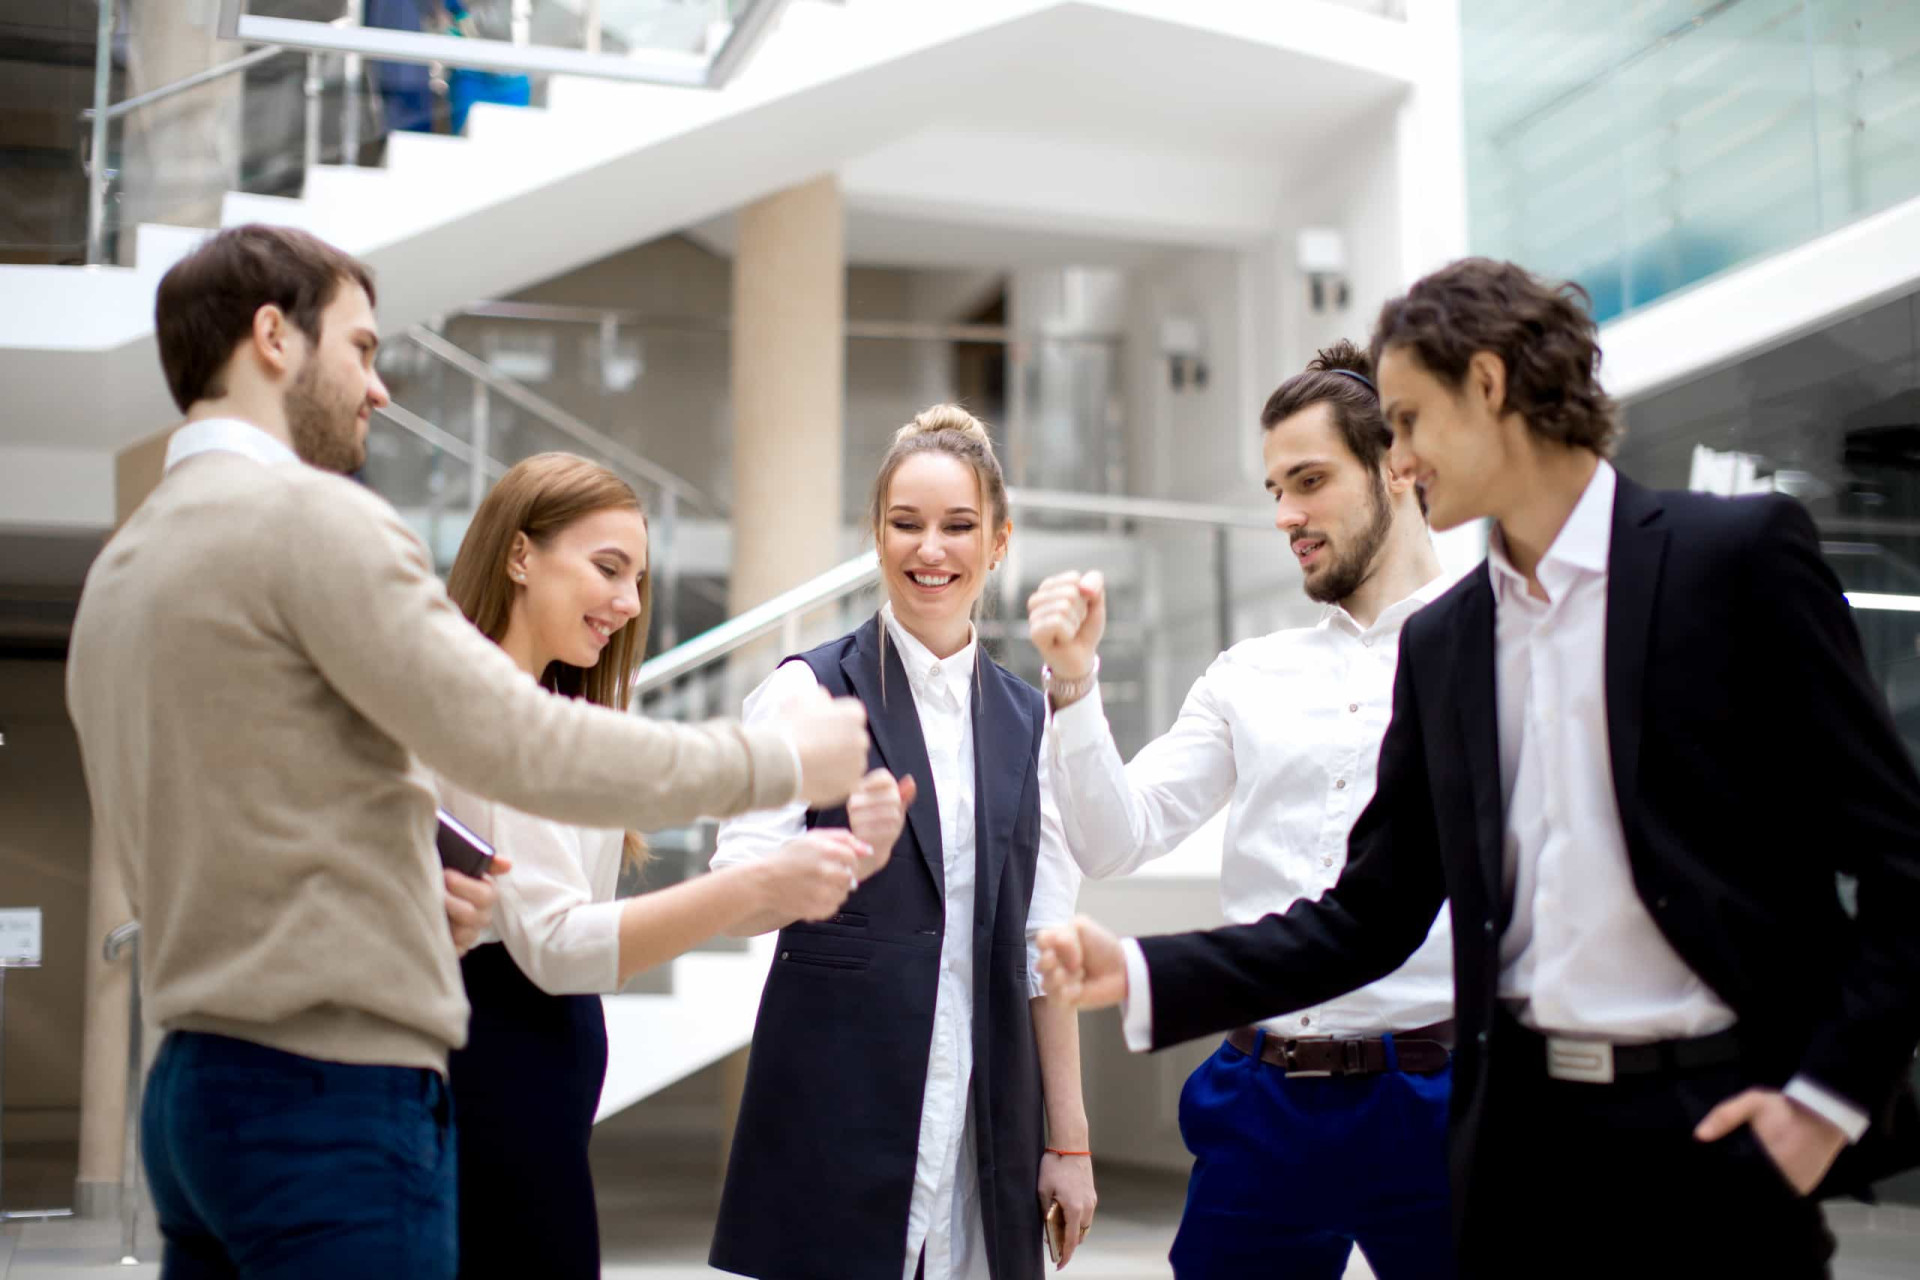 <p>Many team-building activities put on by companies have the aim of improving the critical thinking skills of employees.</p><p><a href="https://www.msn.com/en-sg/community/channel/vid-7xx8mnucu55yw63we9va2gwr7uihbxwc68fxqp25x6tg4ftibpra?cvid=94631541bc0f4f89bfd59158d696ad7e">Follow us and access great exclusive content every day</a></p>